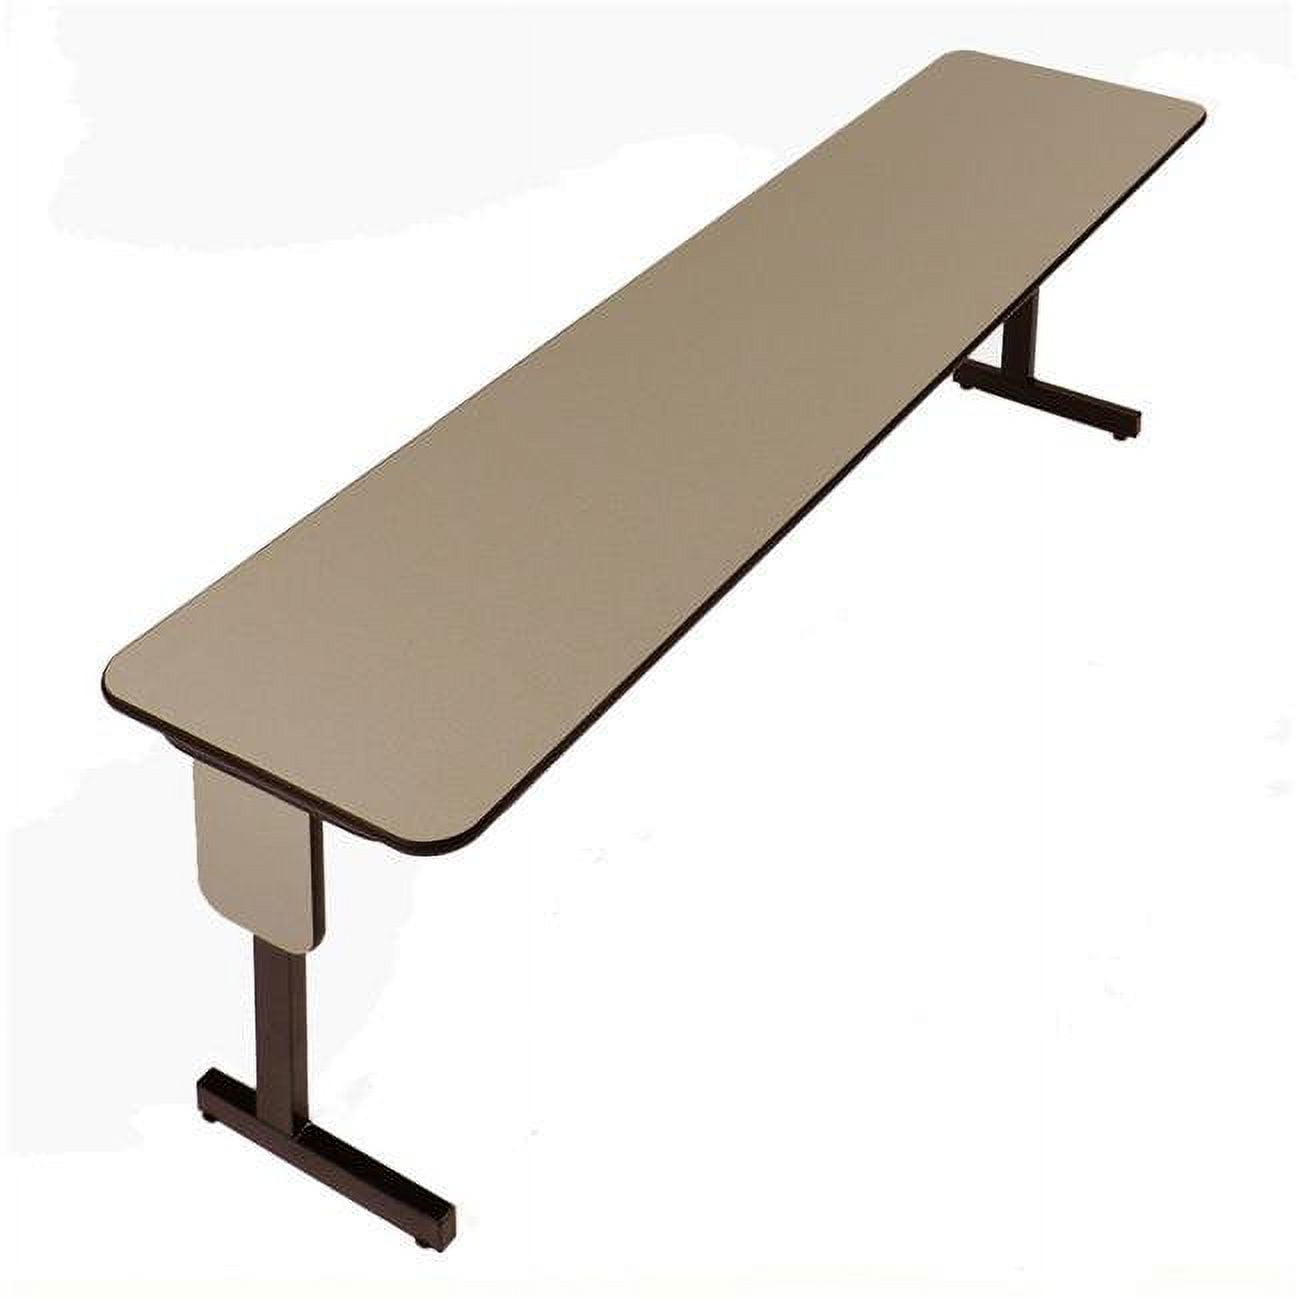 Spa2496px-54 Adjustable Height 0.75 In. High Pressure Rectangular Folding Seminar Table With Panel Leg, Savannah Sand - 24 X 96 In.